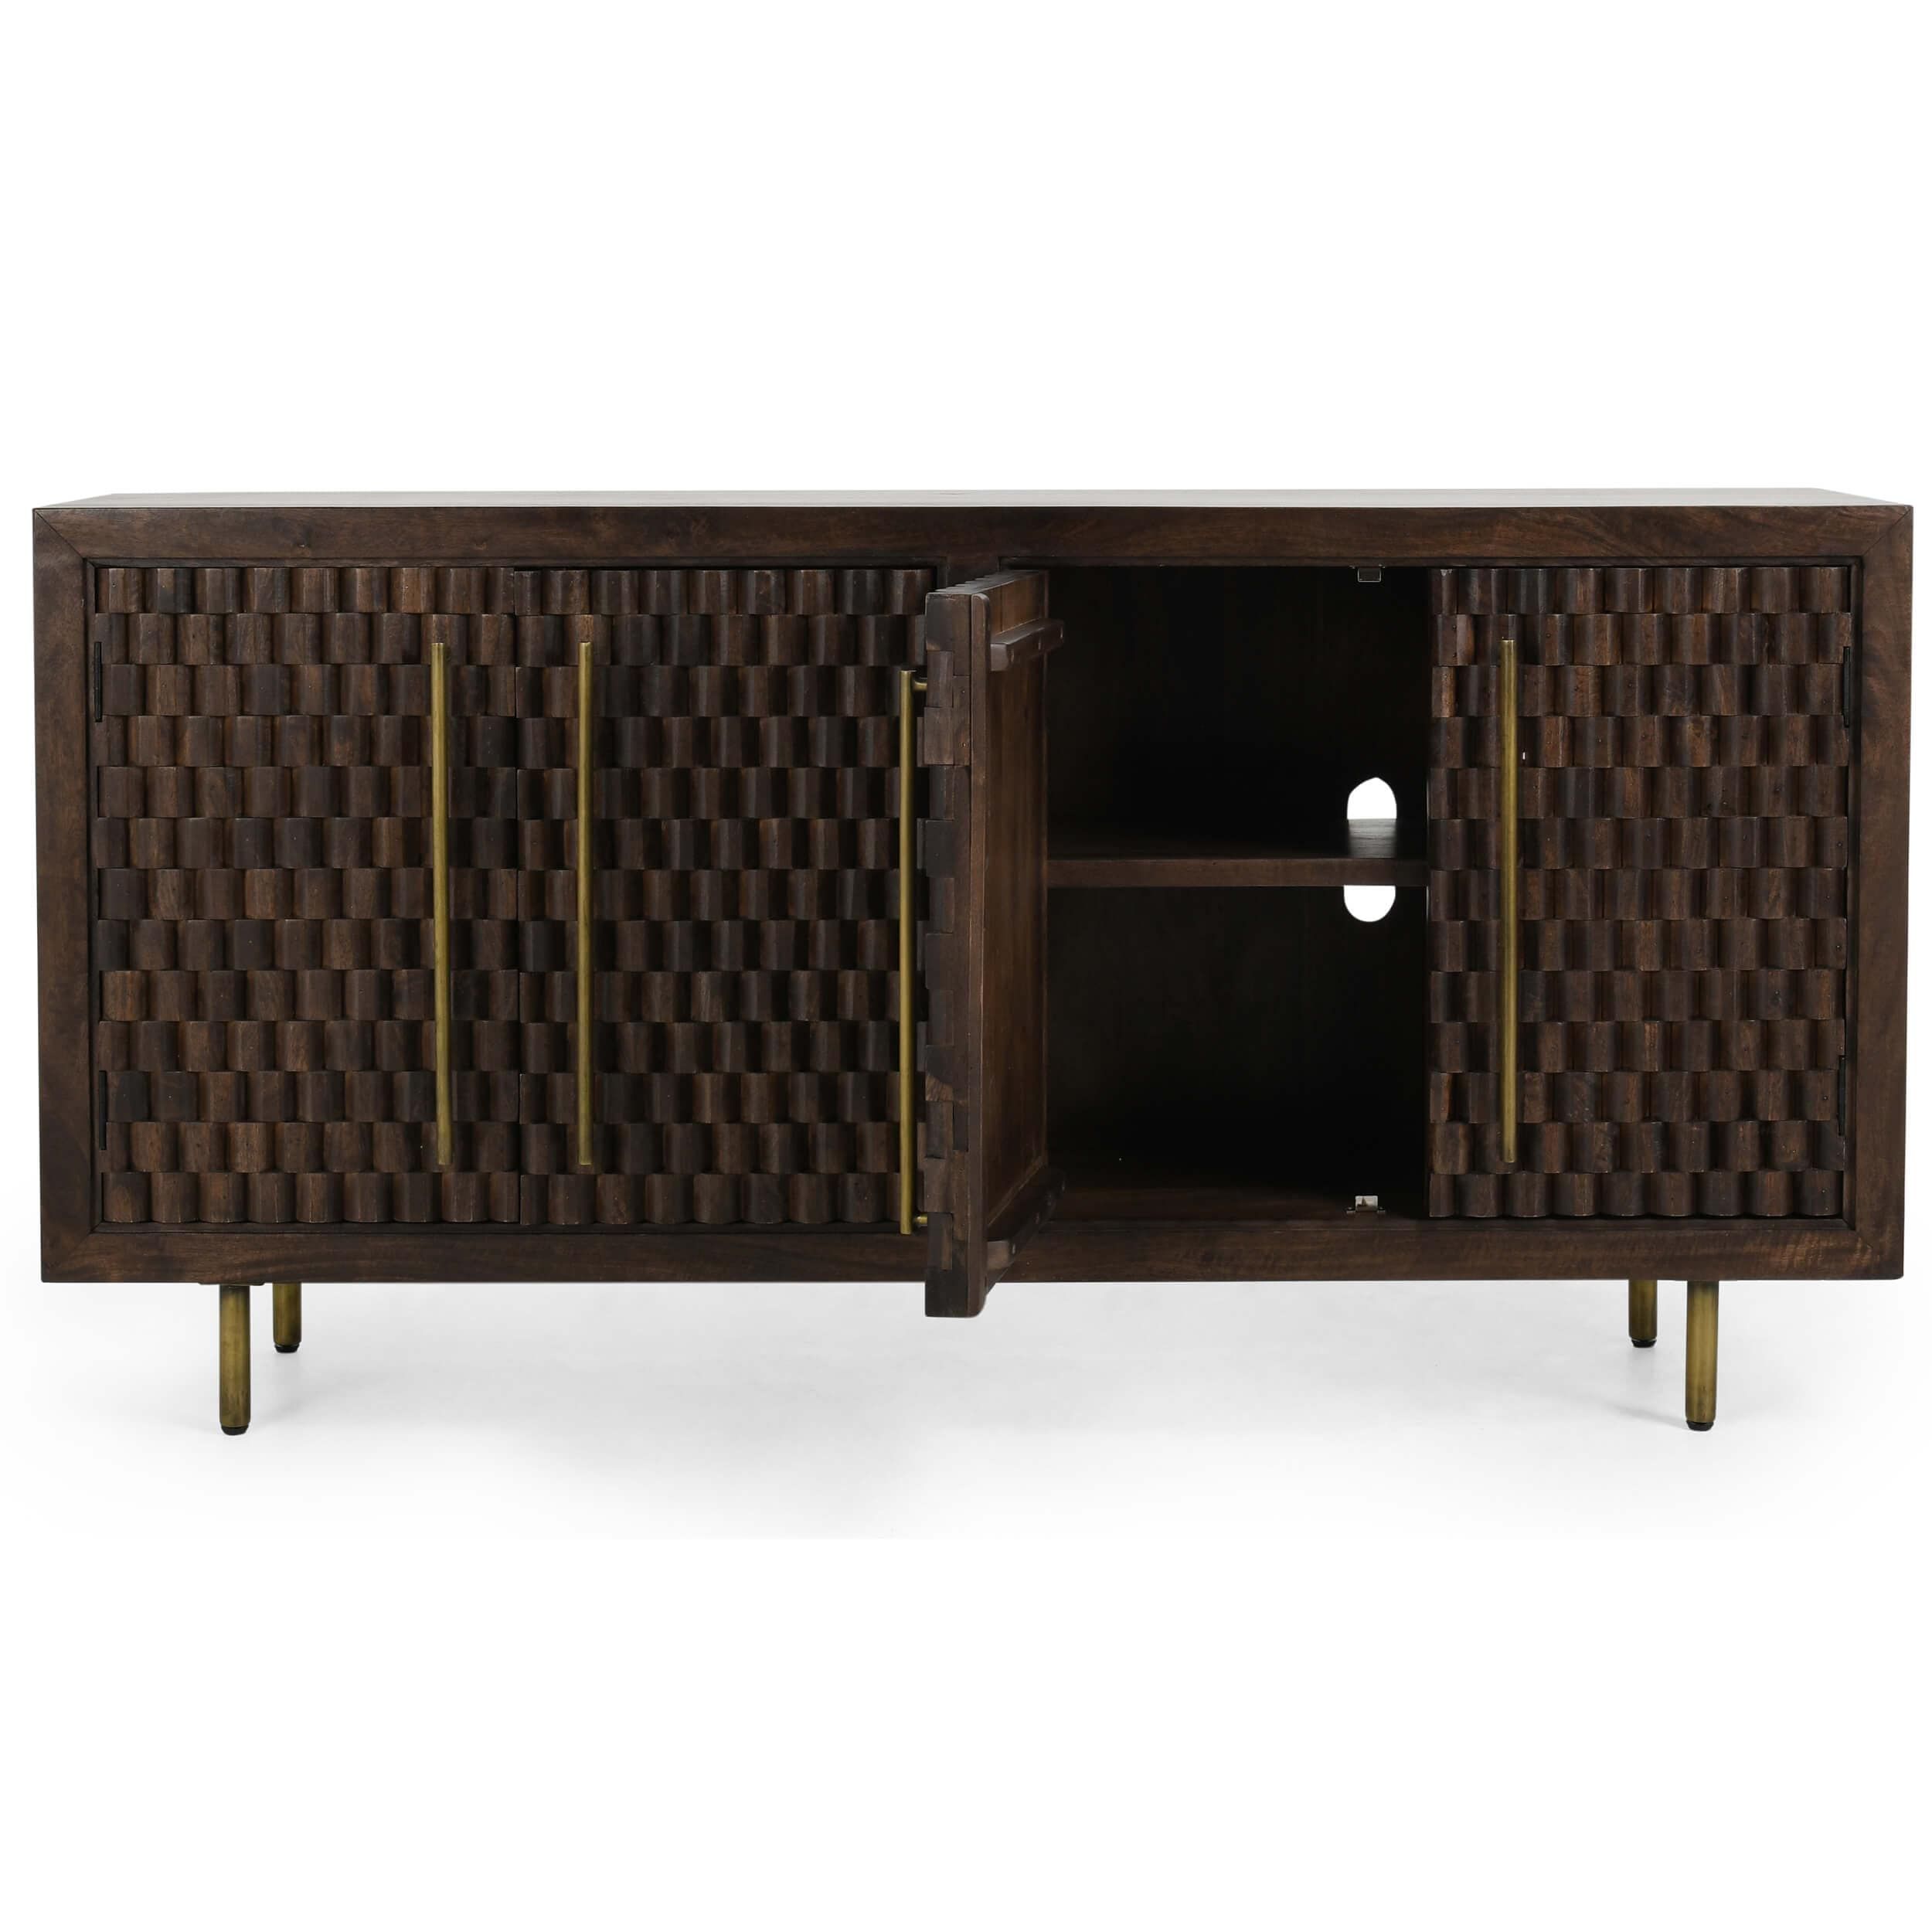 Elegance and Functionality: Exploring the
Norwood Sideboards Collection